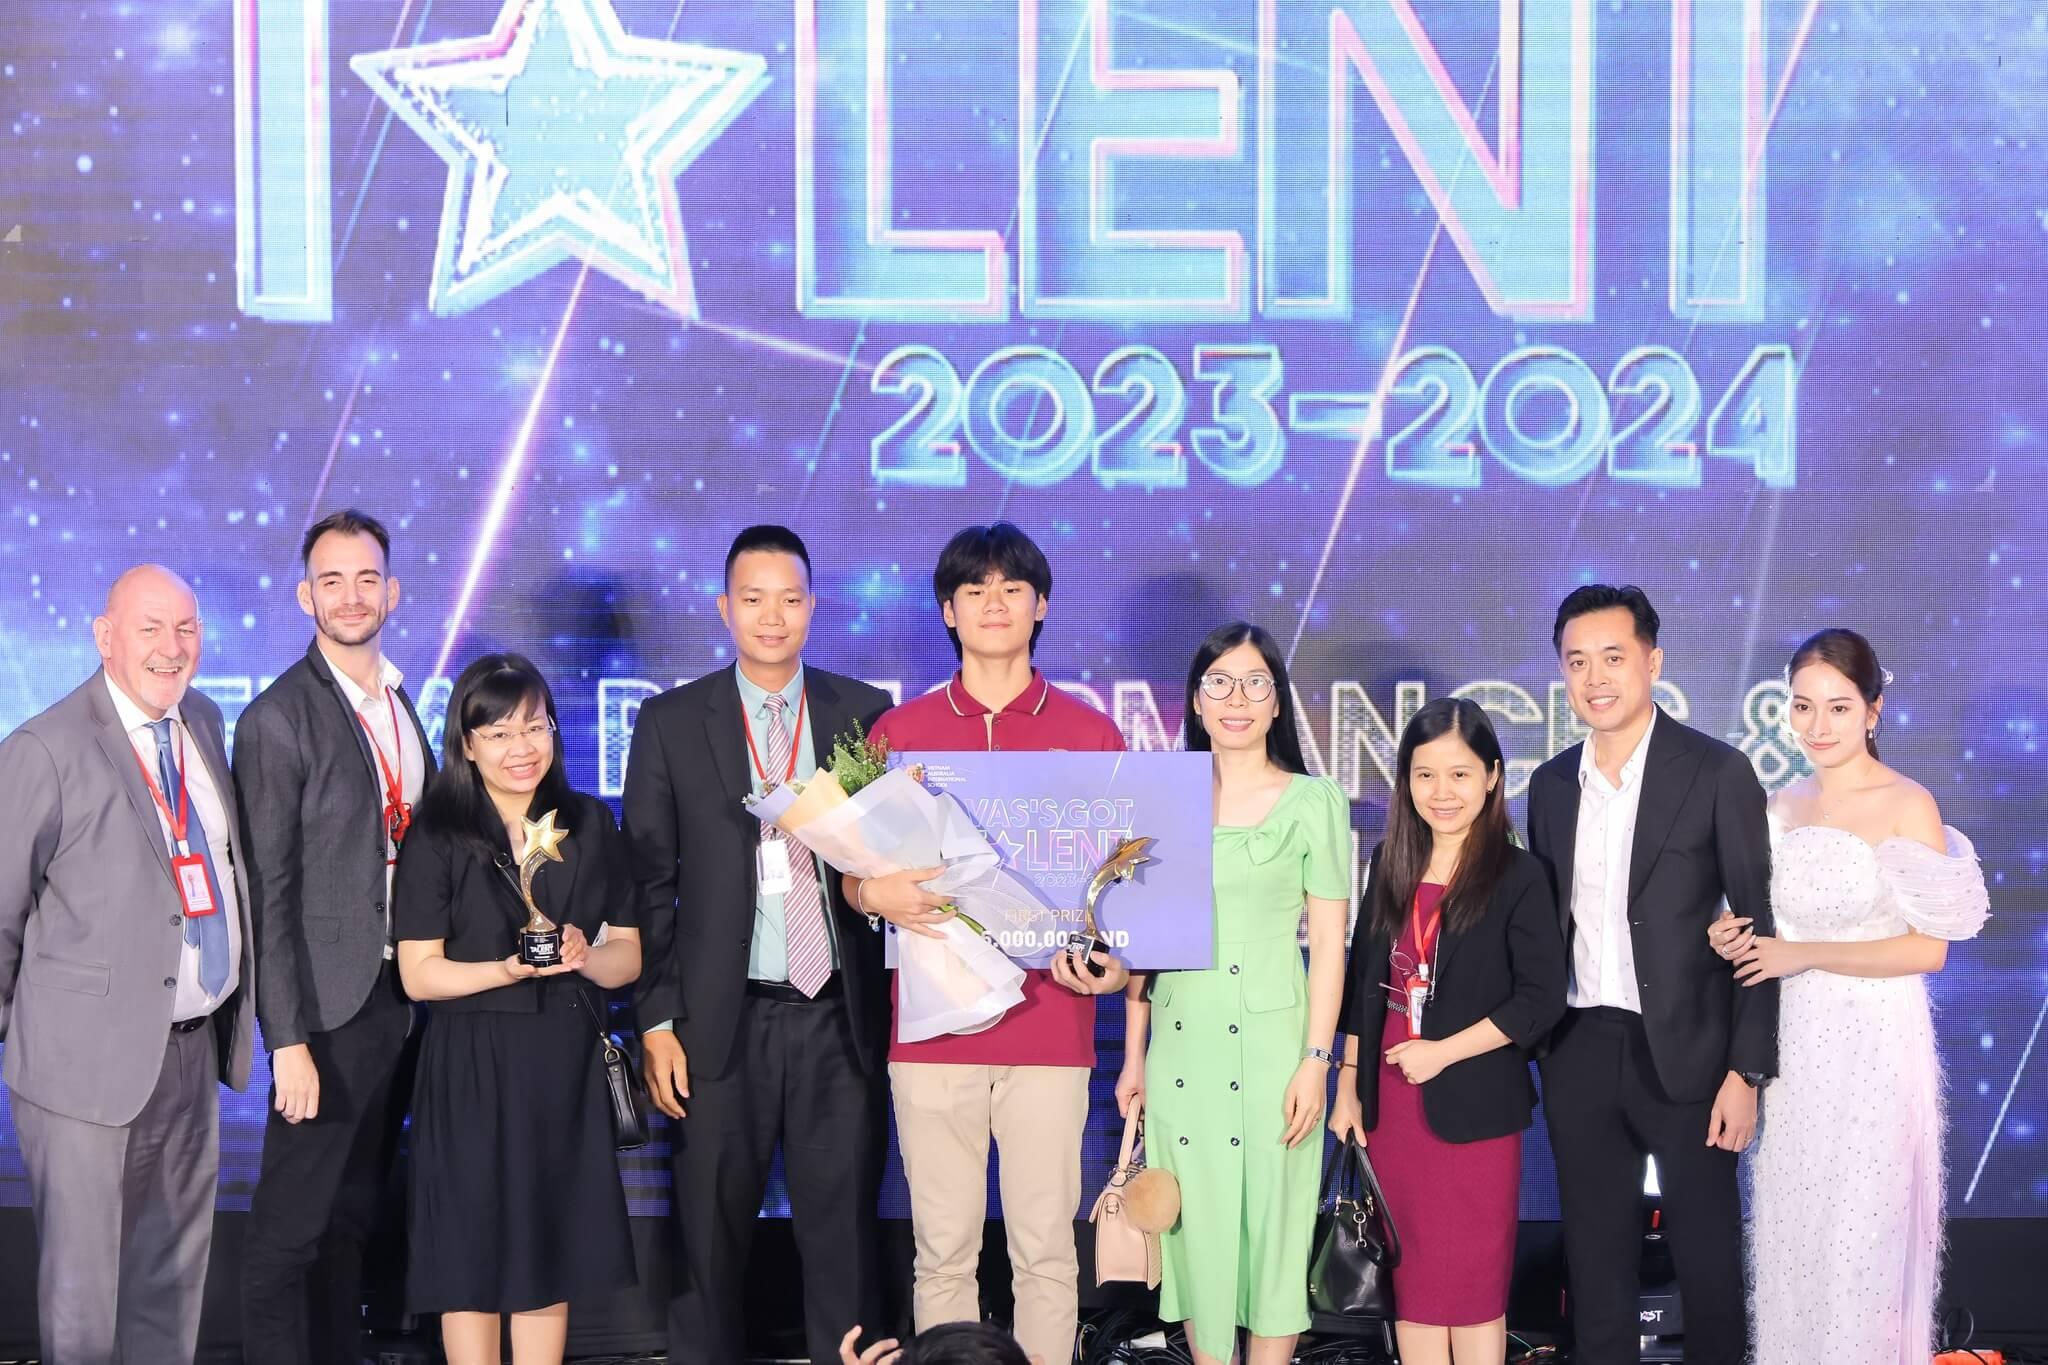 VAS's Got Talent 2023-2024: When Talent and Passion Come Together